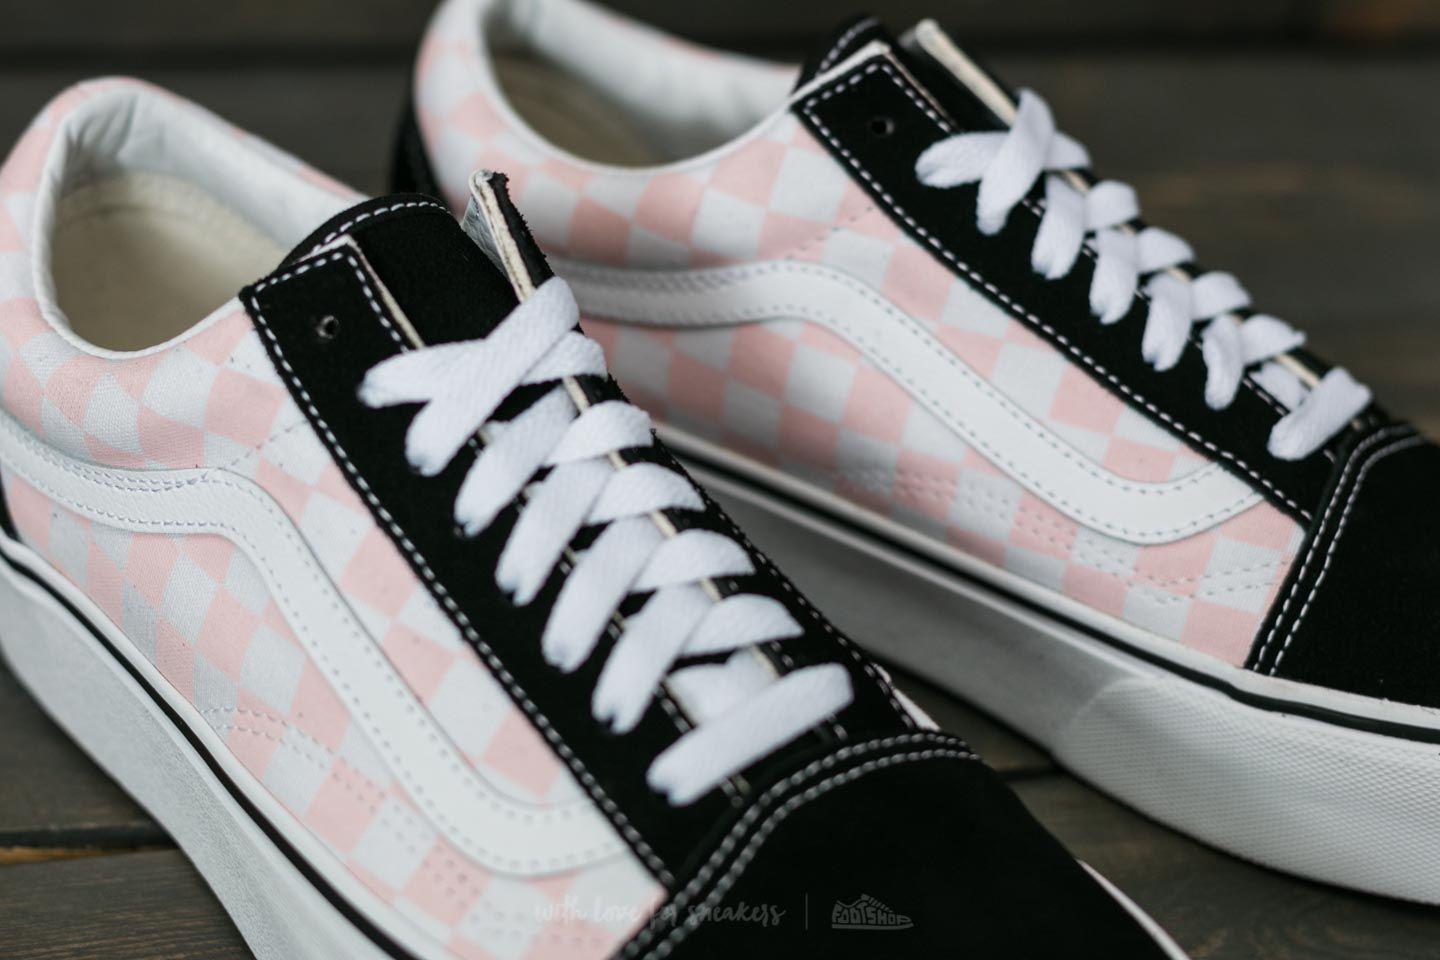 pink and white checkered old skool vans